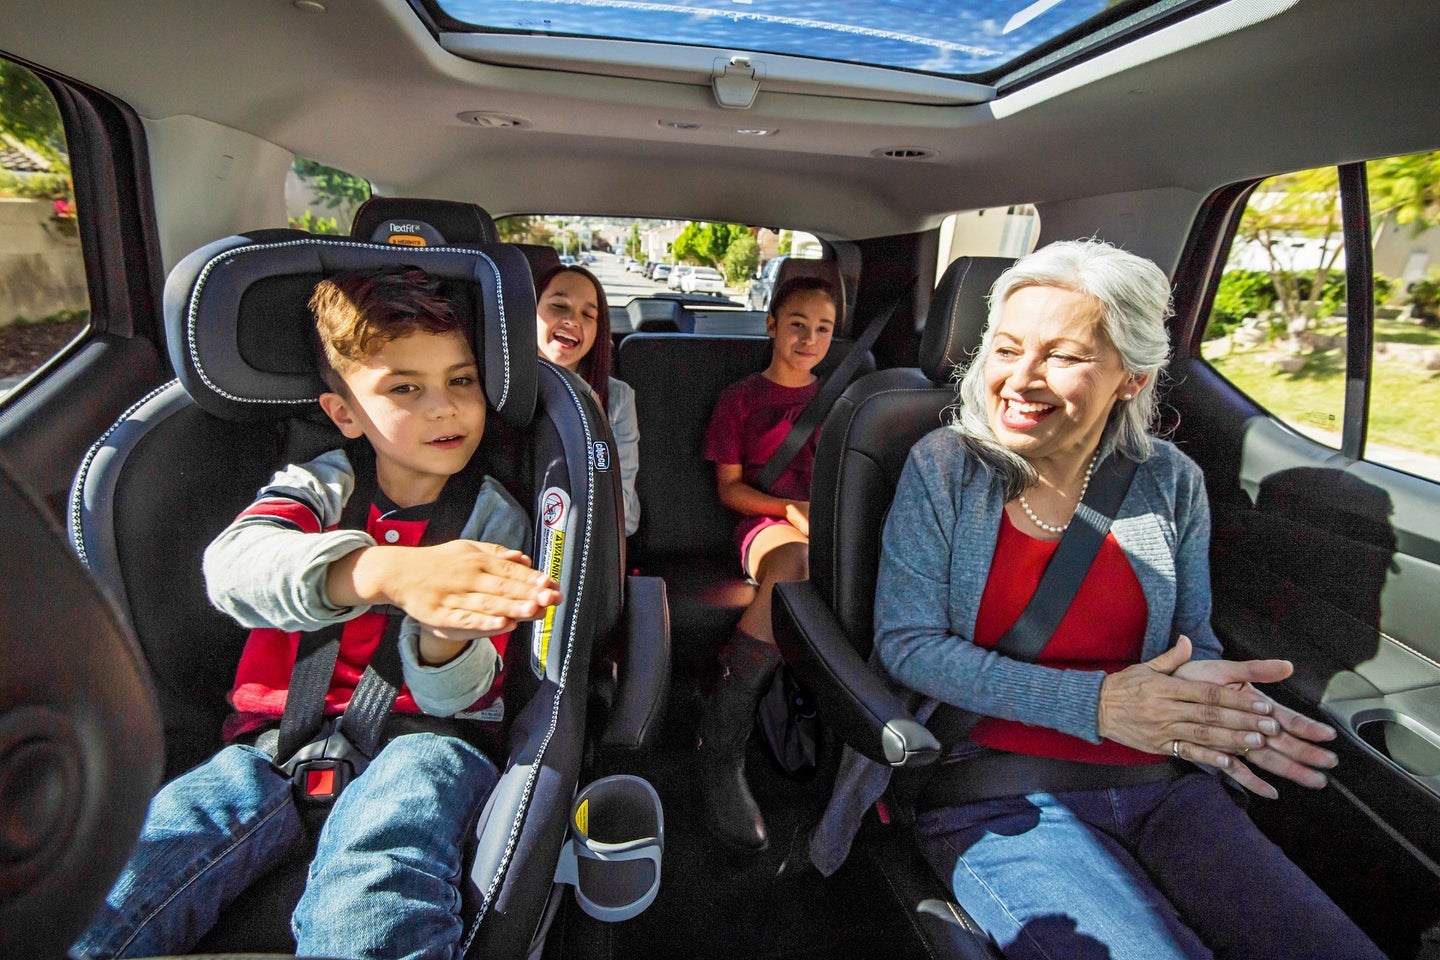 Safety Experts: Car Booster Seats Much Improved in Last Nine Years